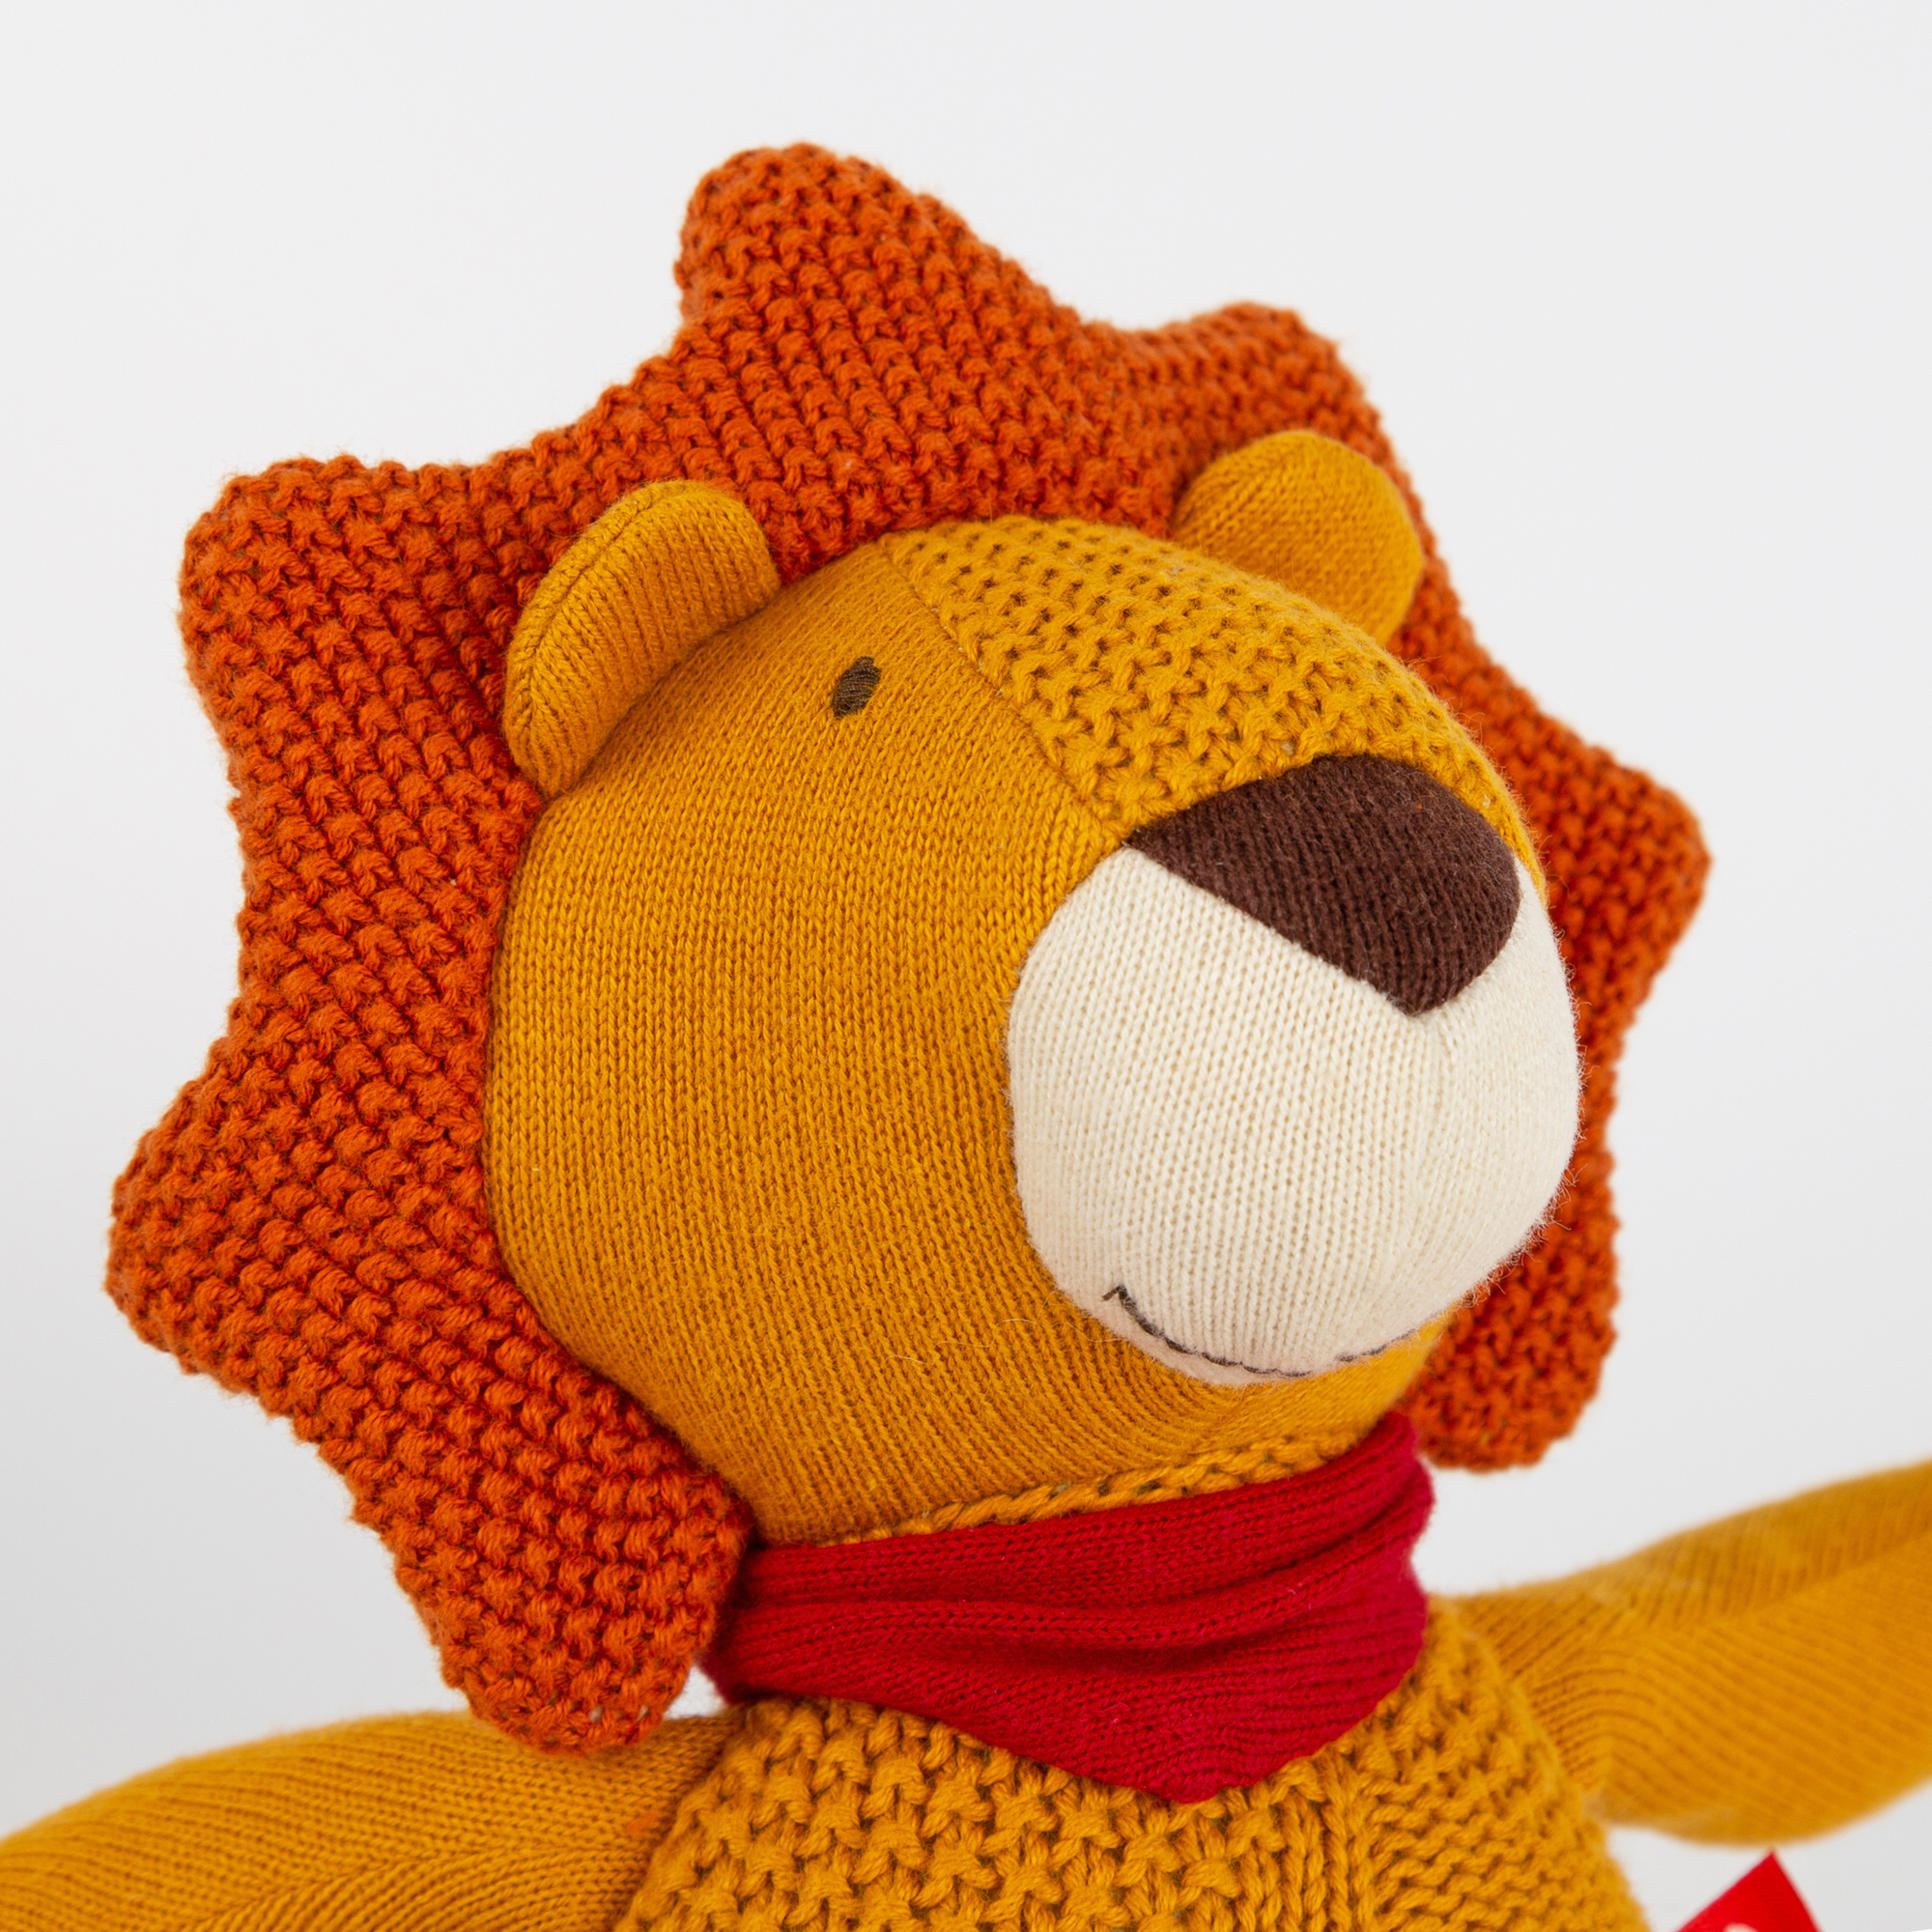 Baby musical soft toy lion, Knitted Love